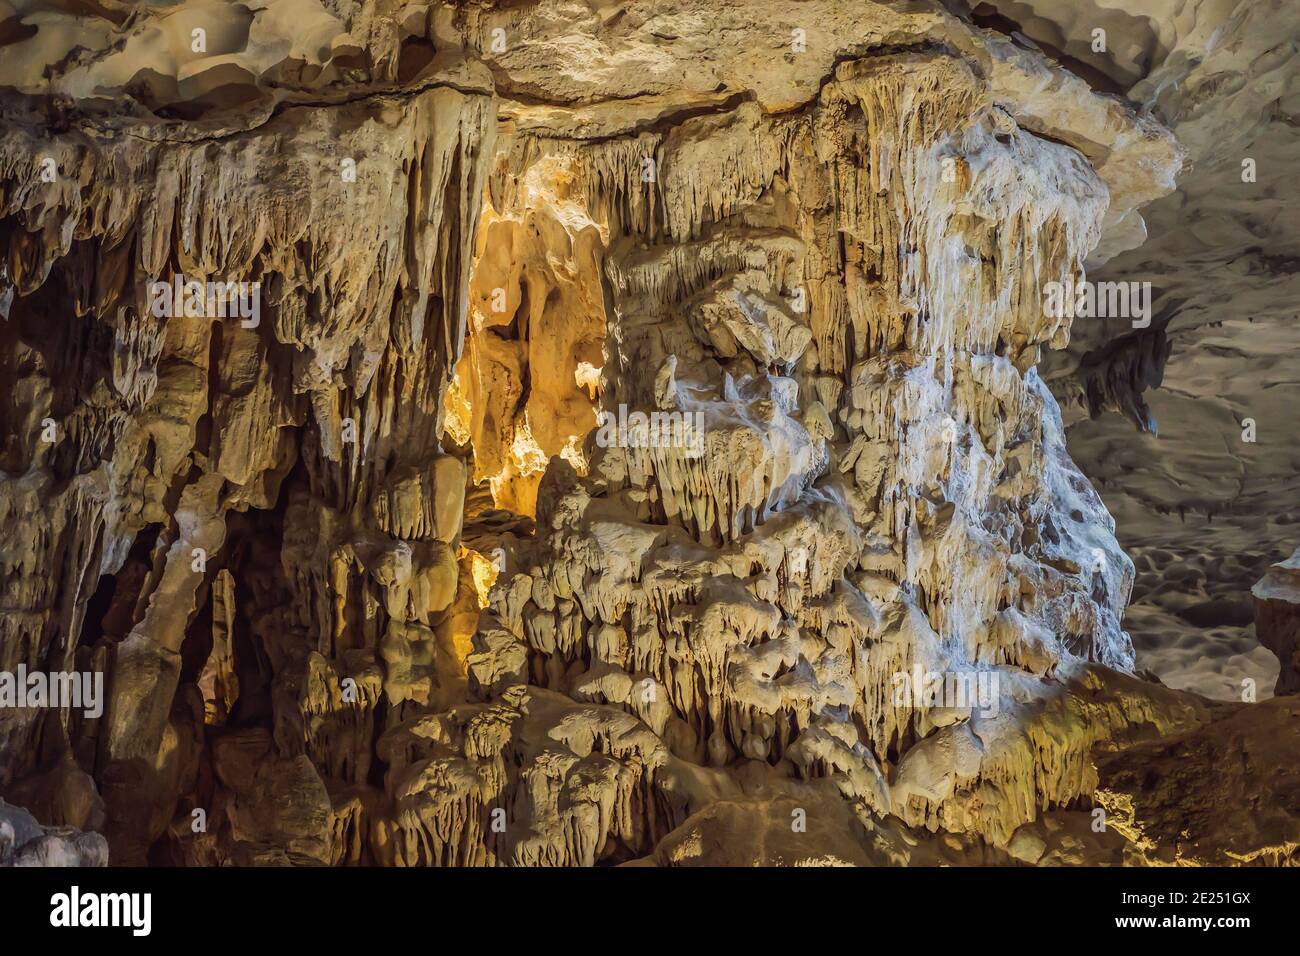 Hang Sung Sot Grotto Cave of Surprises, Halong Bay, Vietnam Stock Photo